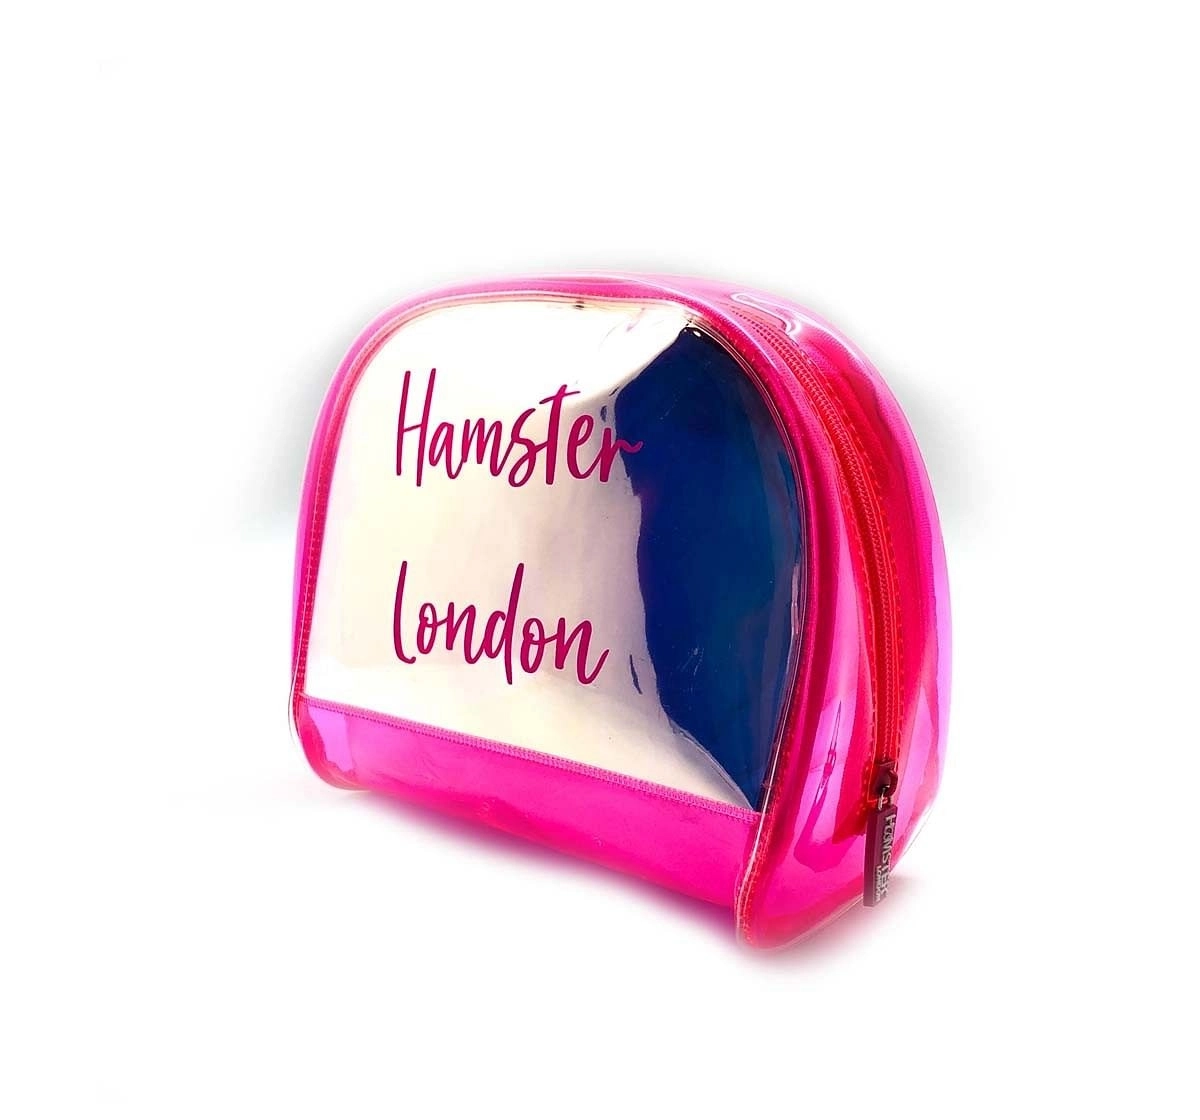 Hamster London Shell Pouch Pink Bags for Age 3Y+ (Pink)